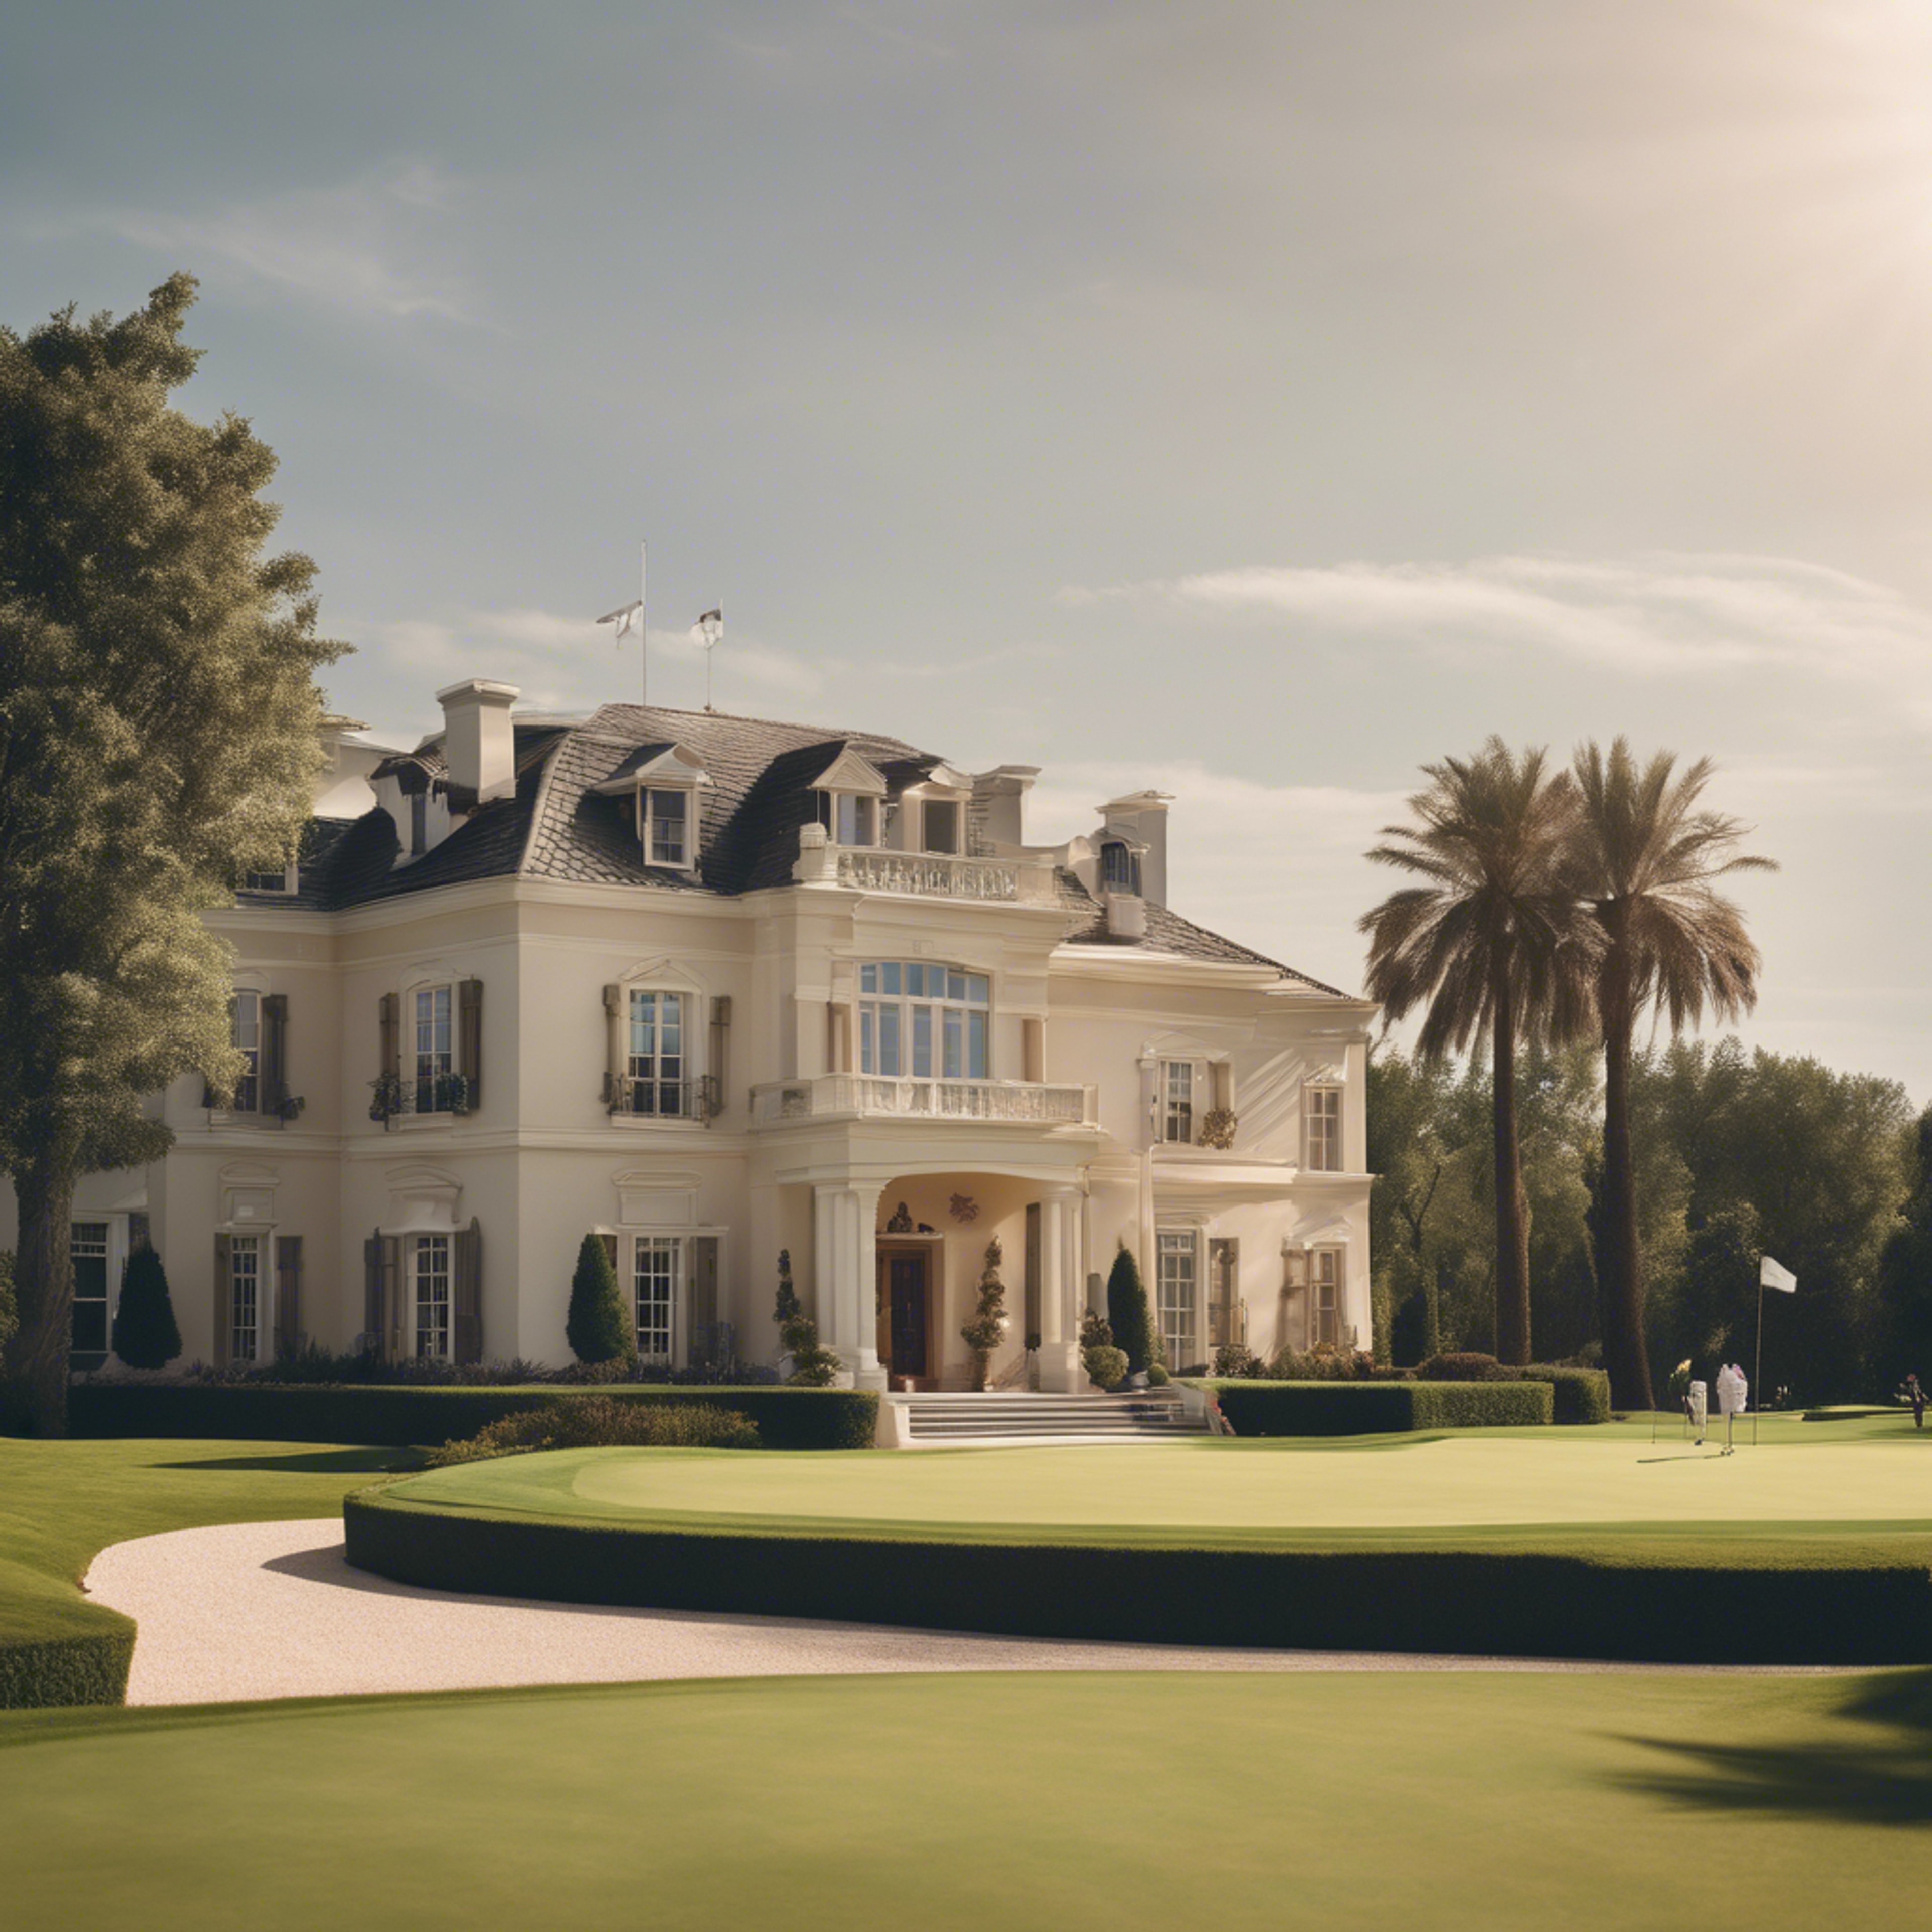 A grand, preppy stucco-fronted mansion, overlooking a well-groomed golf course teeming with golfers under the summer sun. Wallpaper[06f977a3201f4e25bc46]